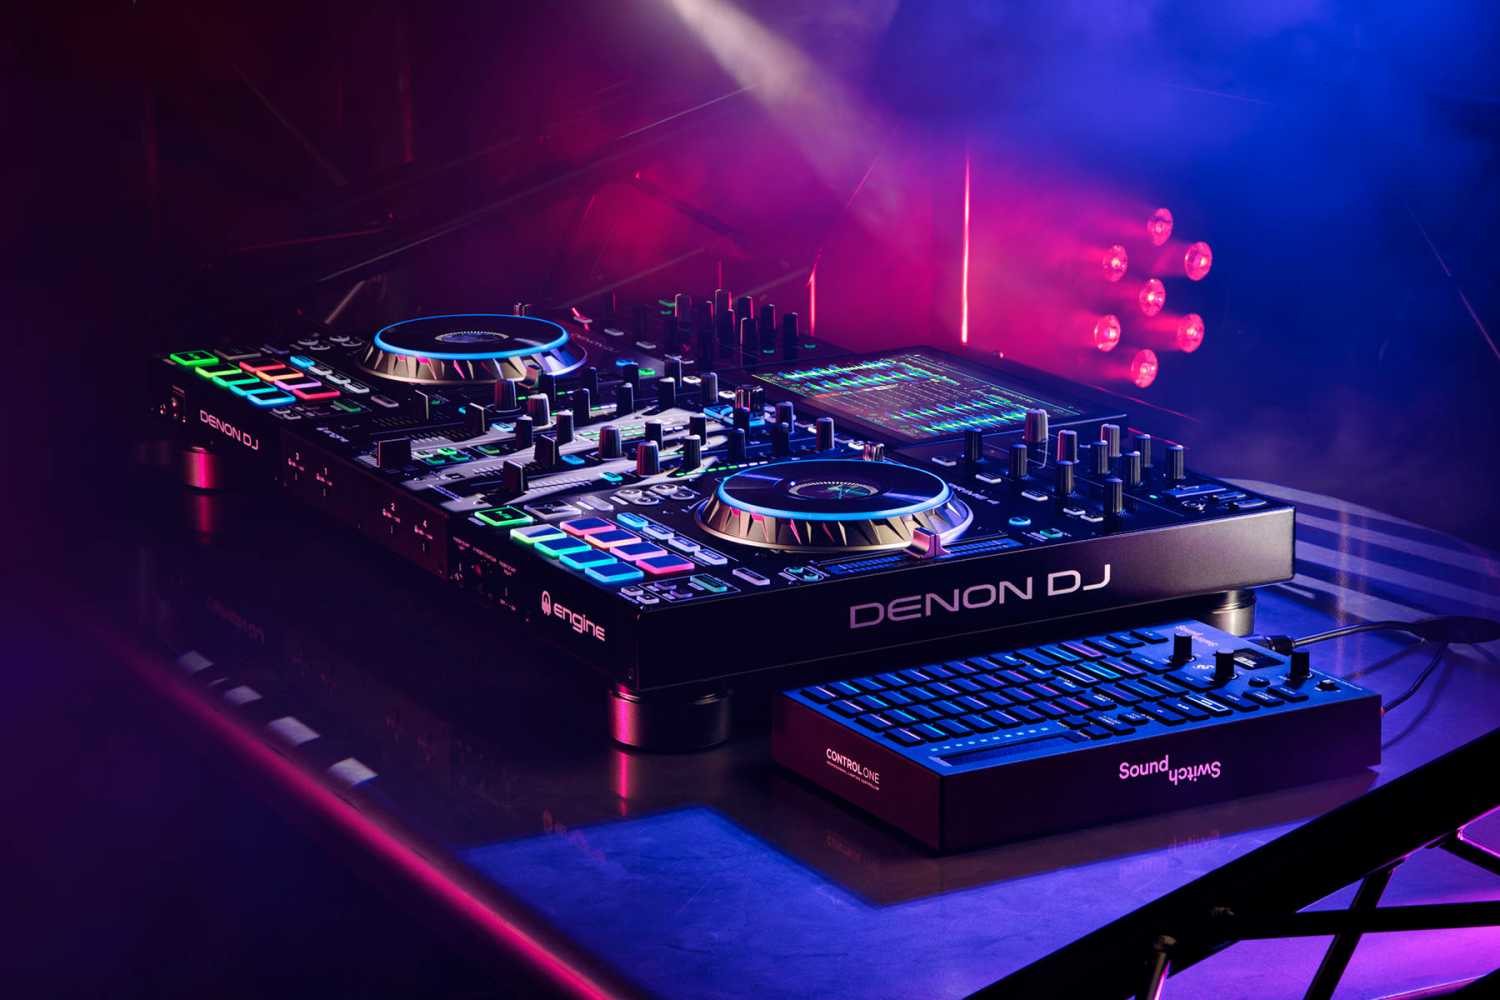 Compatibility with professional DJ platforms makes it easy to integrate Control One into existing DJ setups